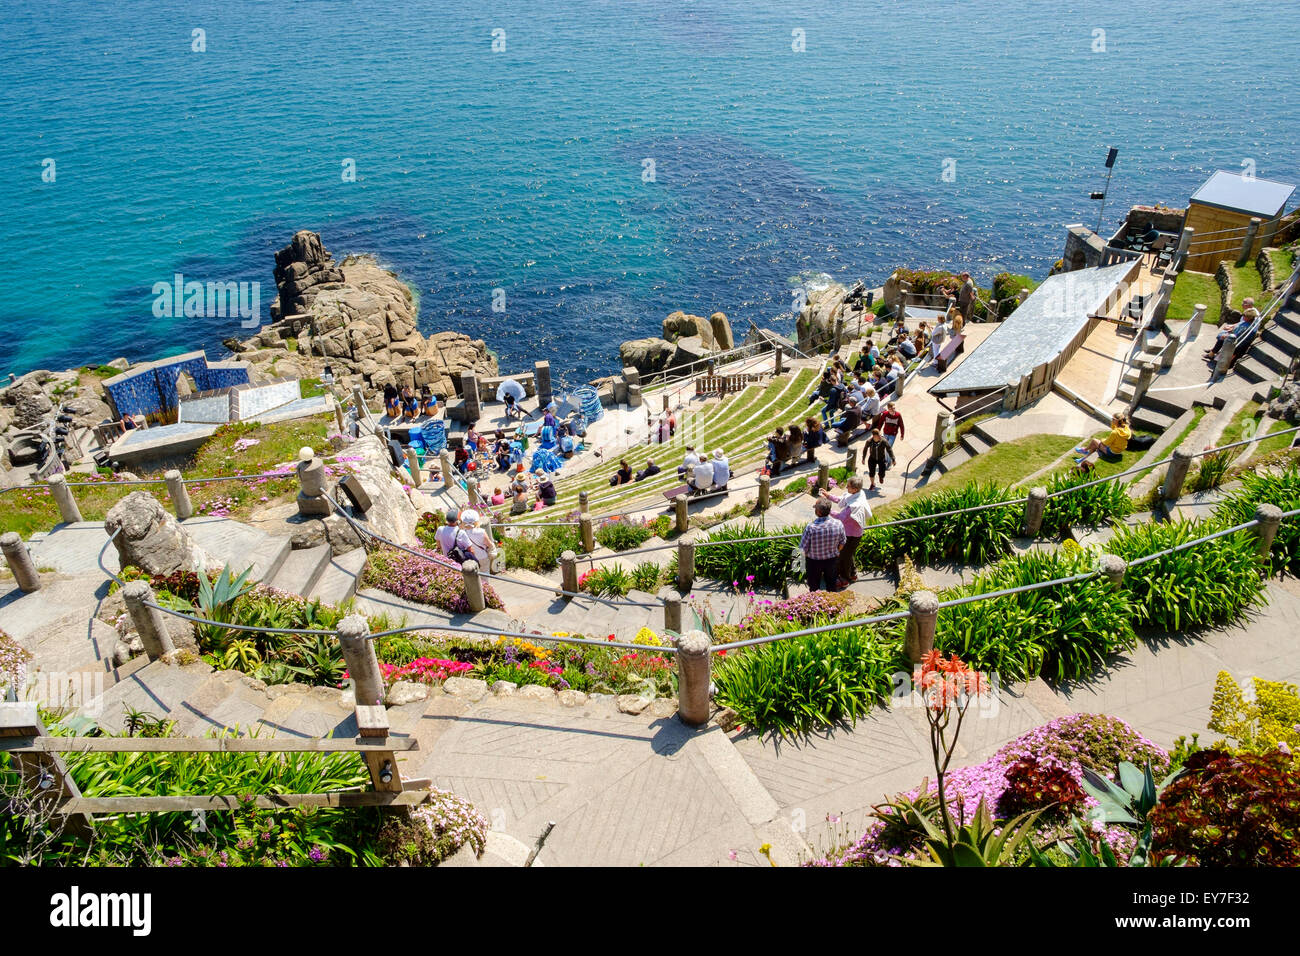 The Minack Theatre overlooking the sea at Porthcurno near Penzance, Cornwall, England, UK in summer Stock Photo